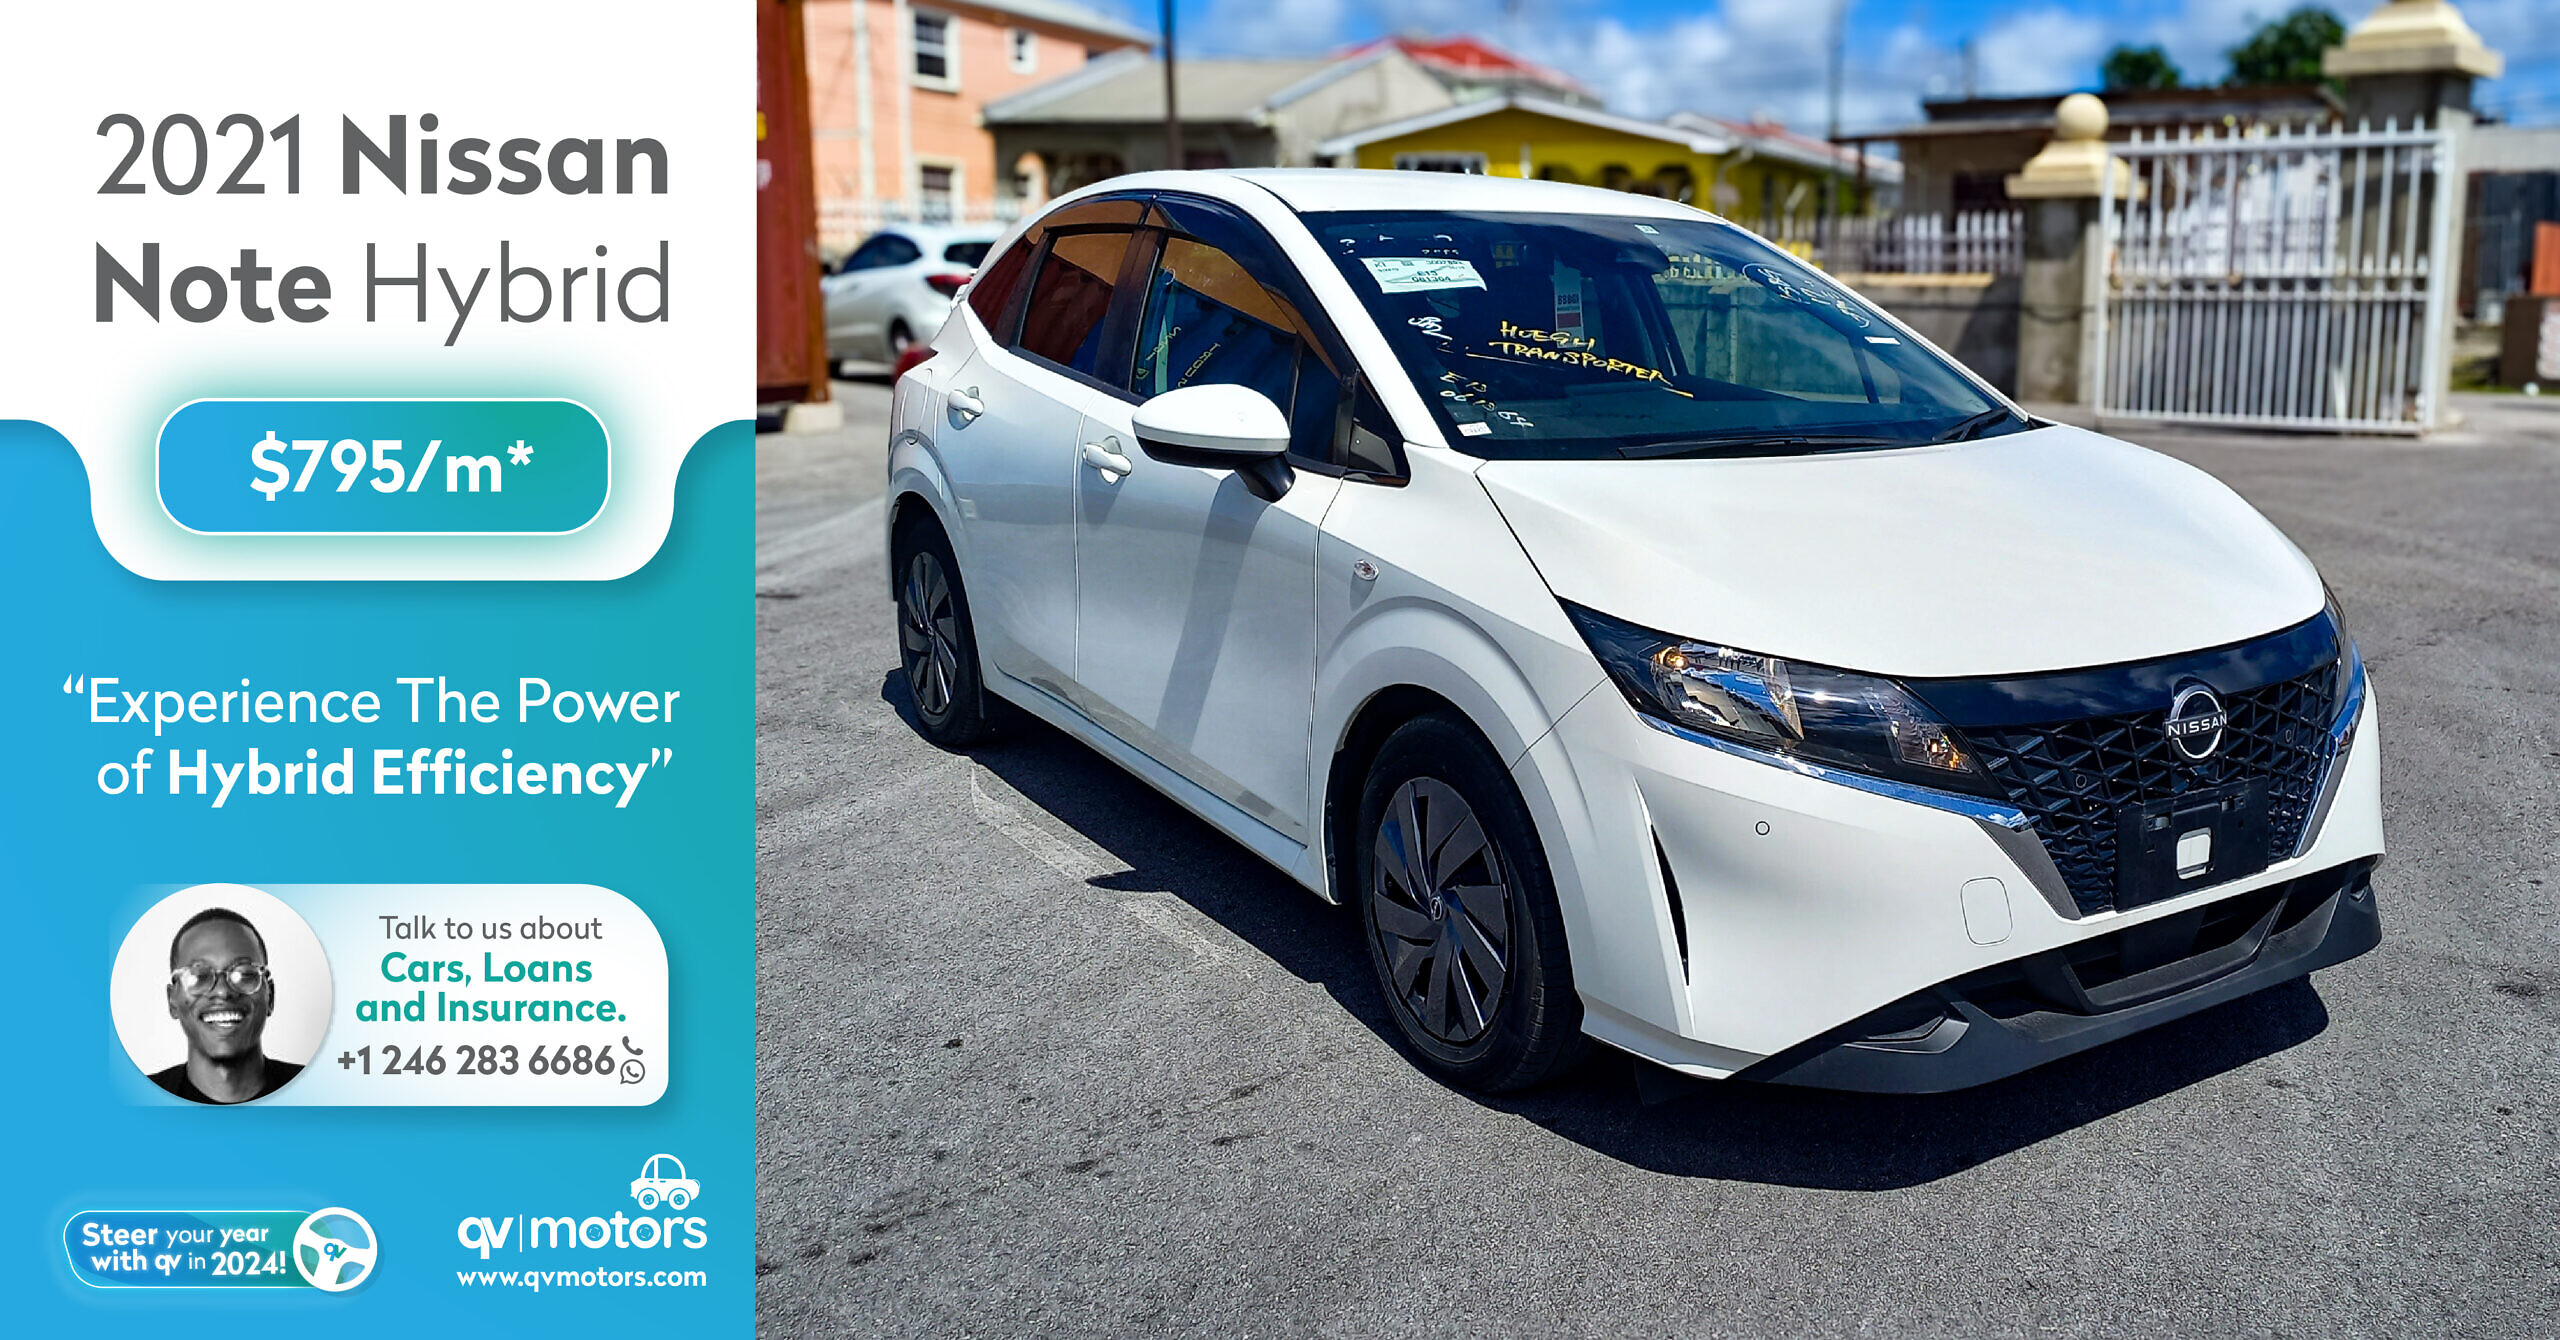 2021 Nissan Note Hybrid – Save up to 50% on Gas!